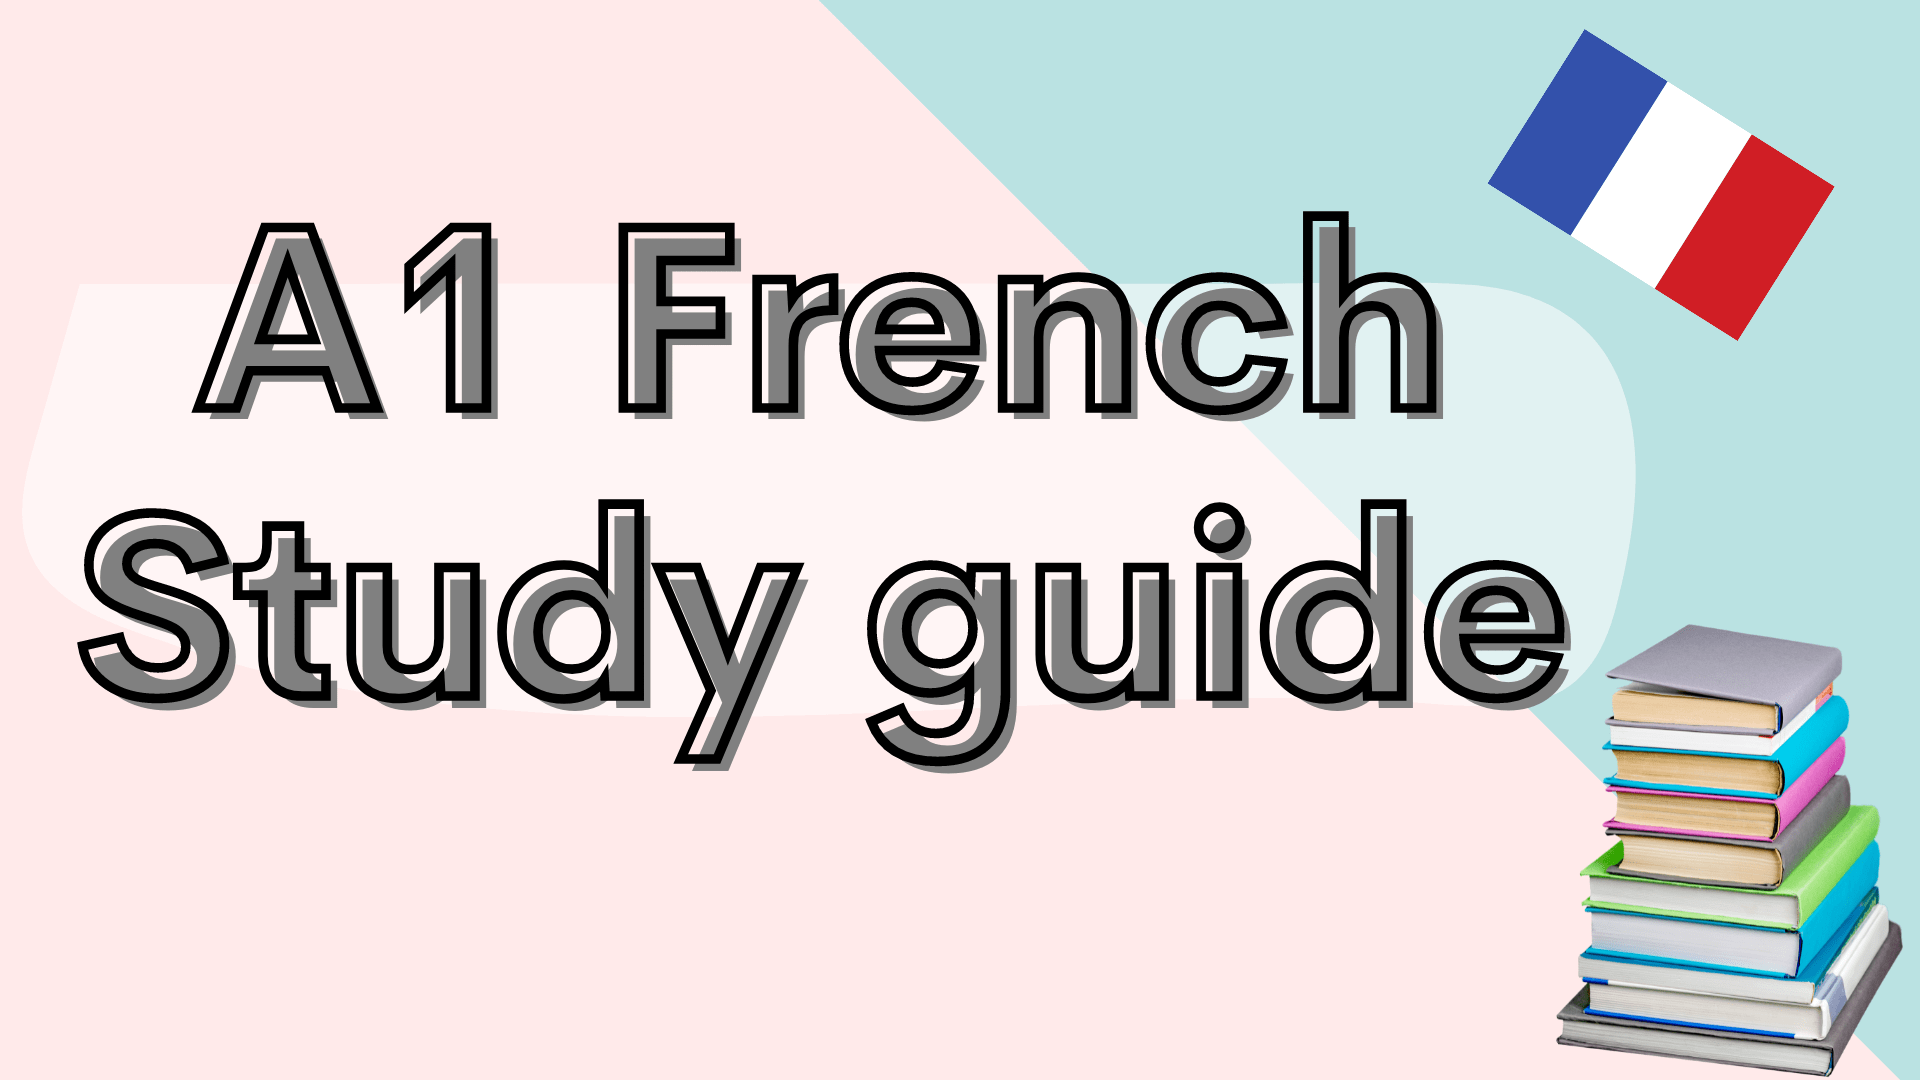 a1-french-study-guide-a-clear-view-of-what-to-learn